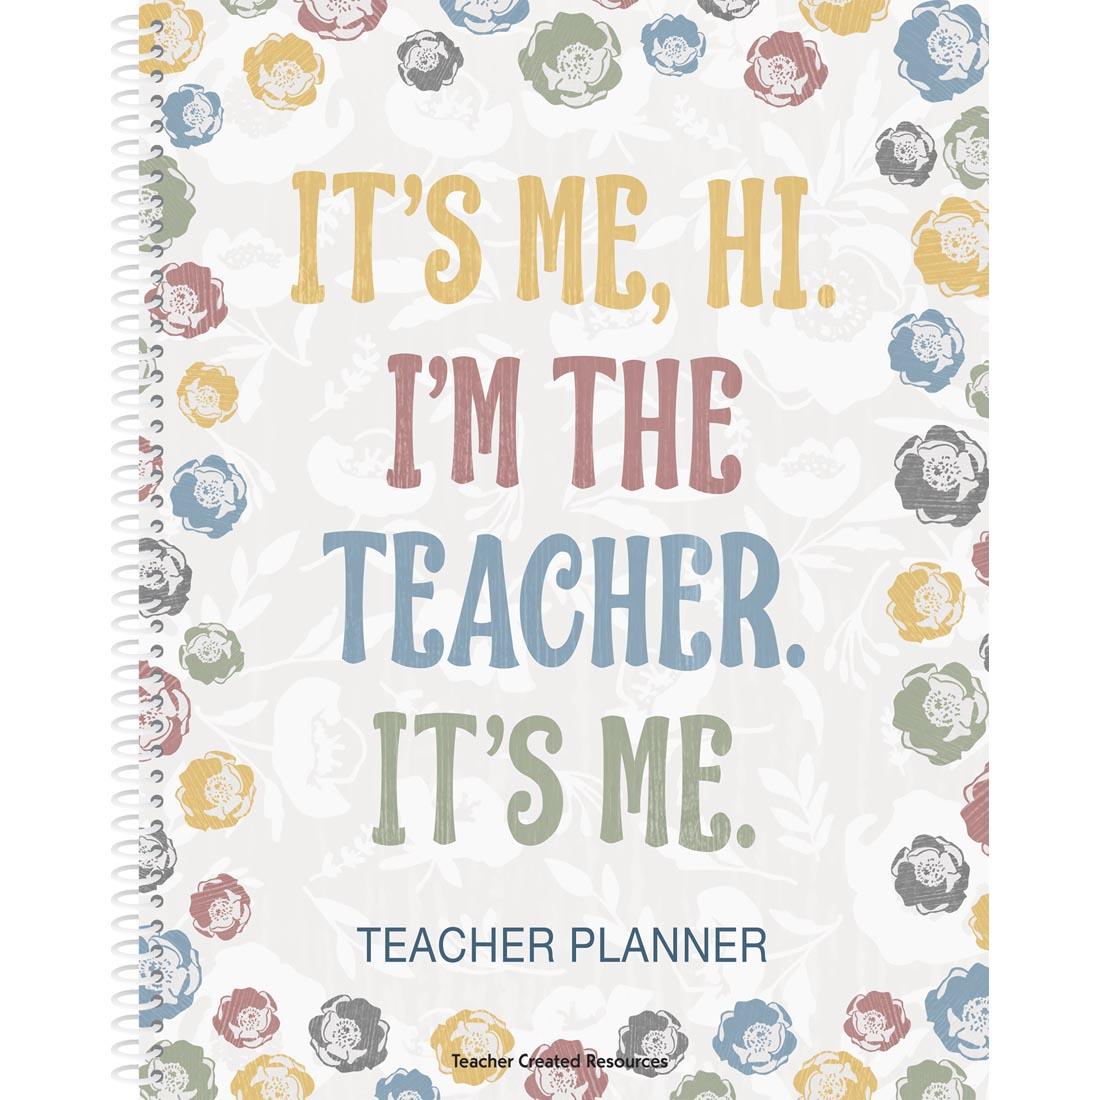 front cover of the Teacher Planner from the Classroom Cottage collection by Teacher Created Resources